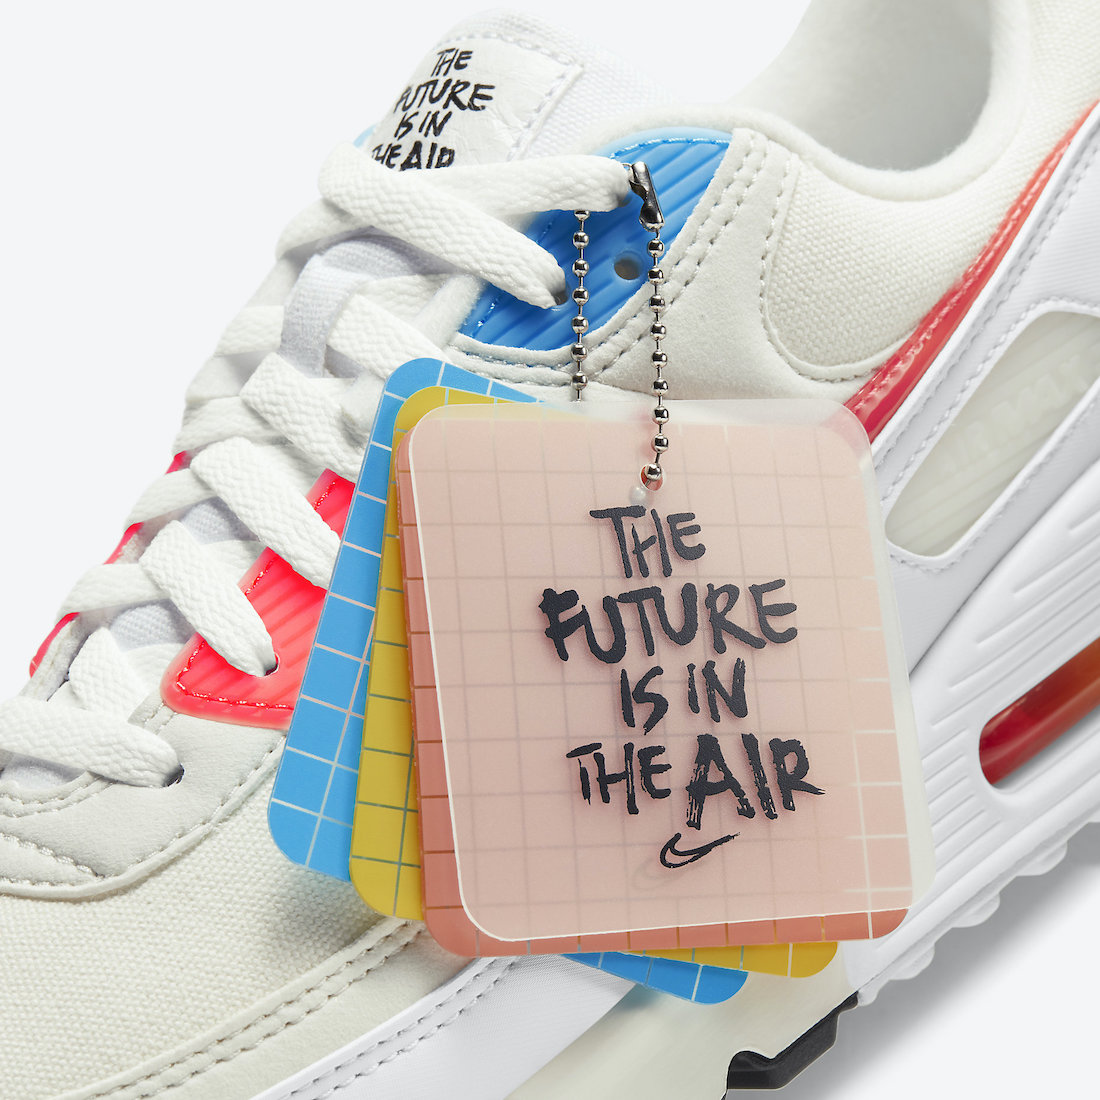 Nike Air Max 90 The Future is in the Air DD8496-161 Release Date Info